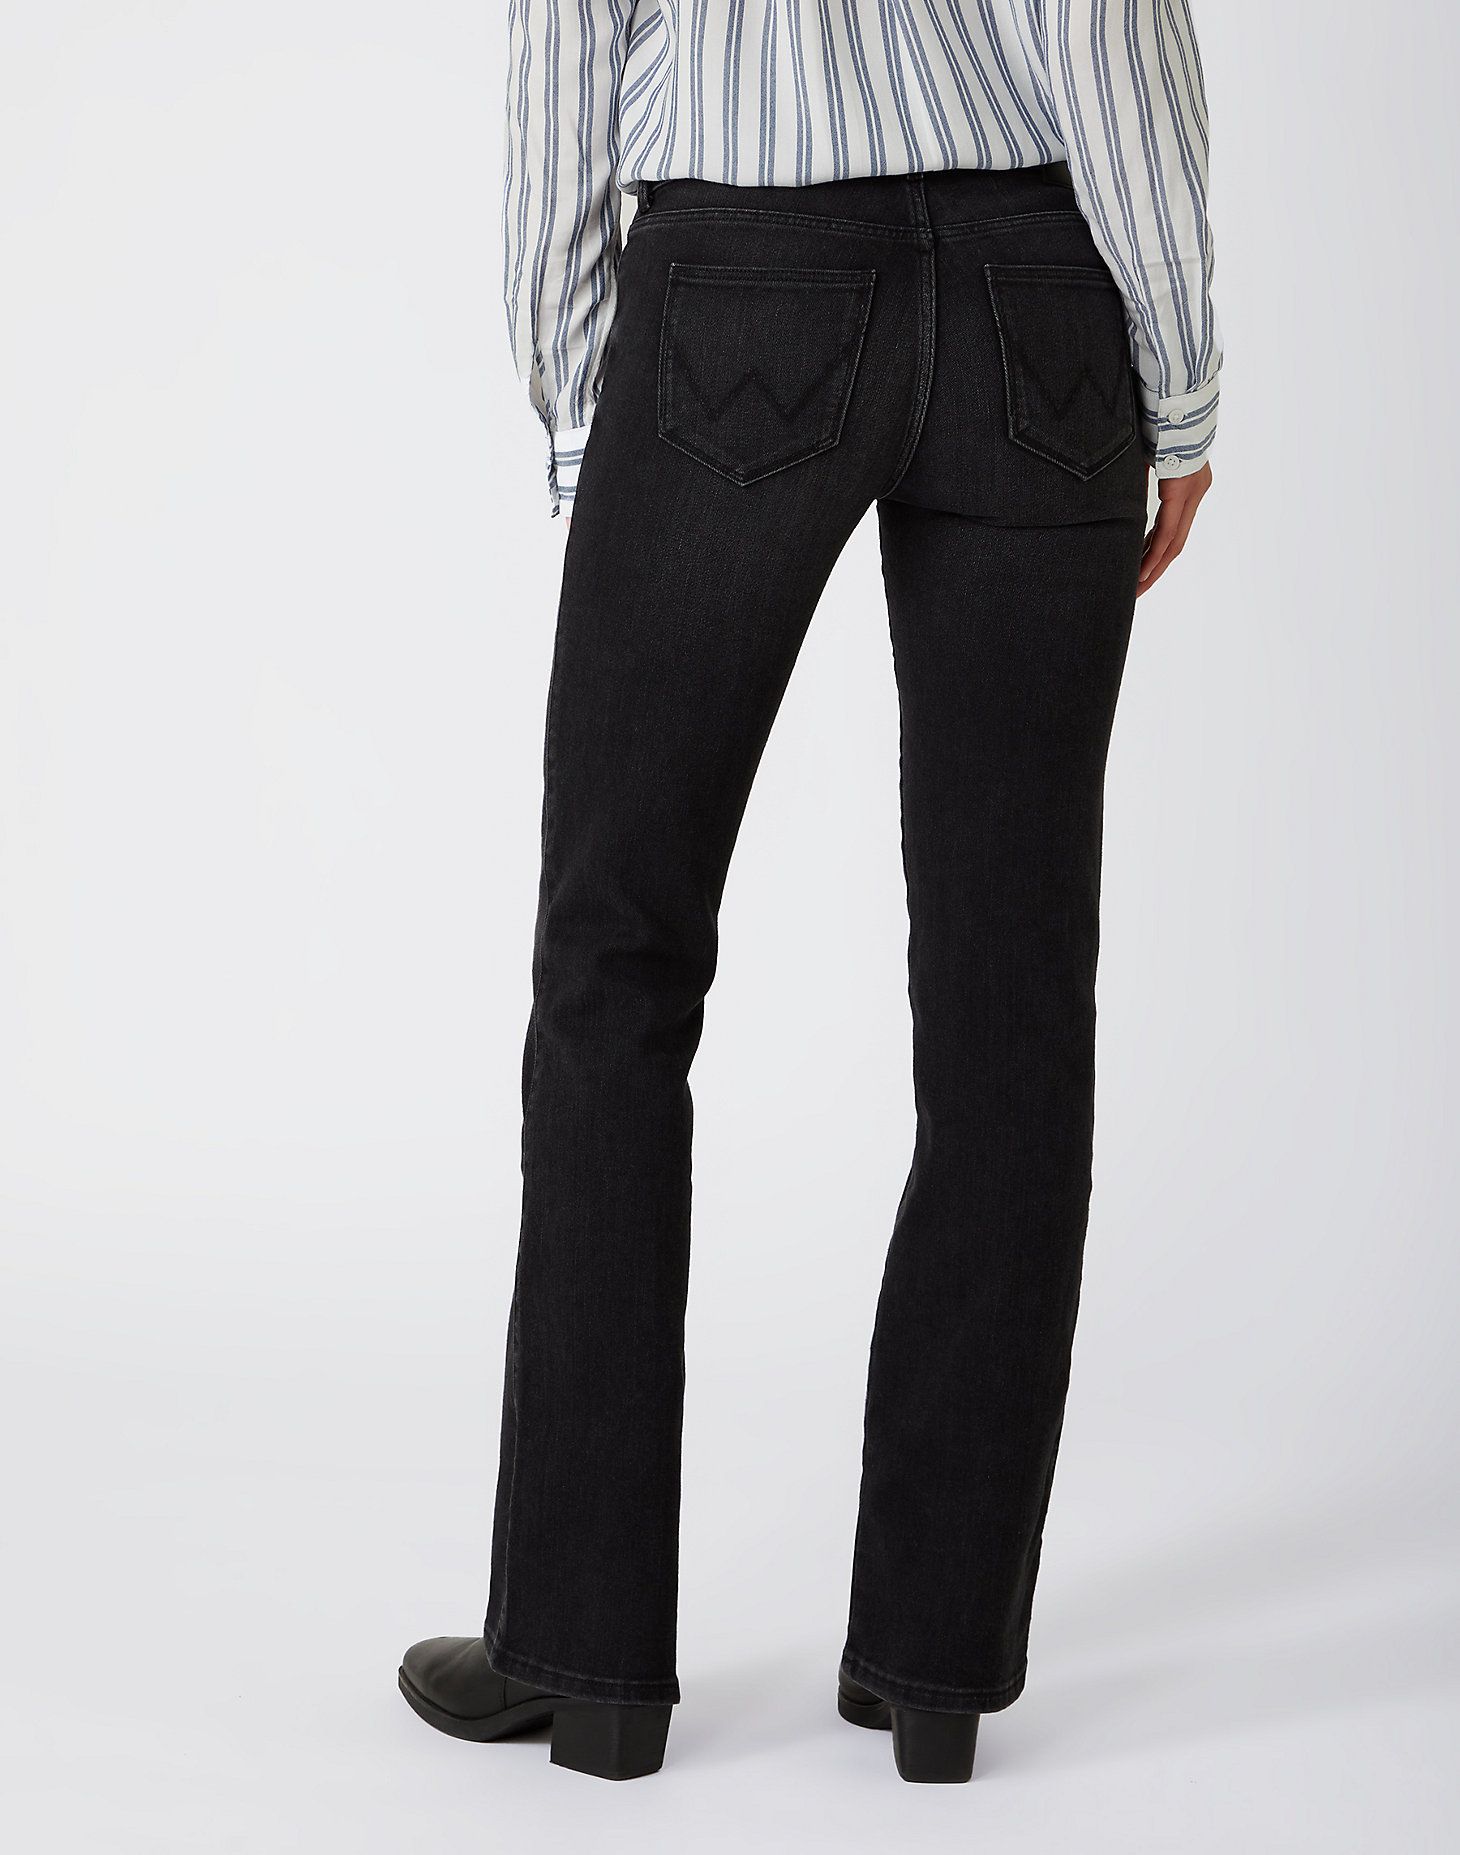 Bootcut Jeans in Soft Star alternative view 2